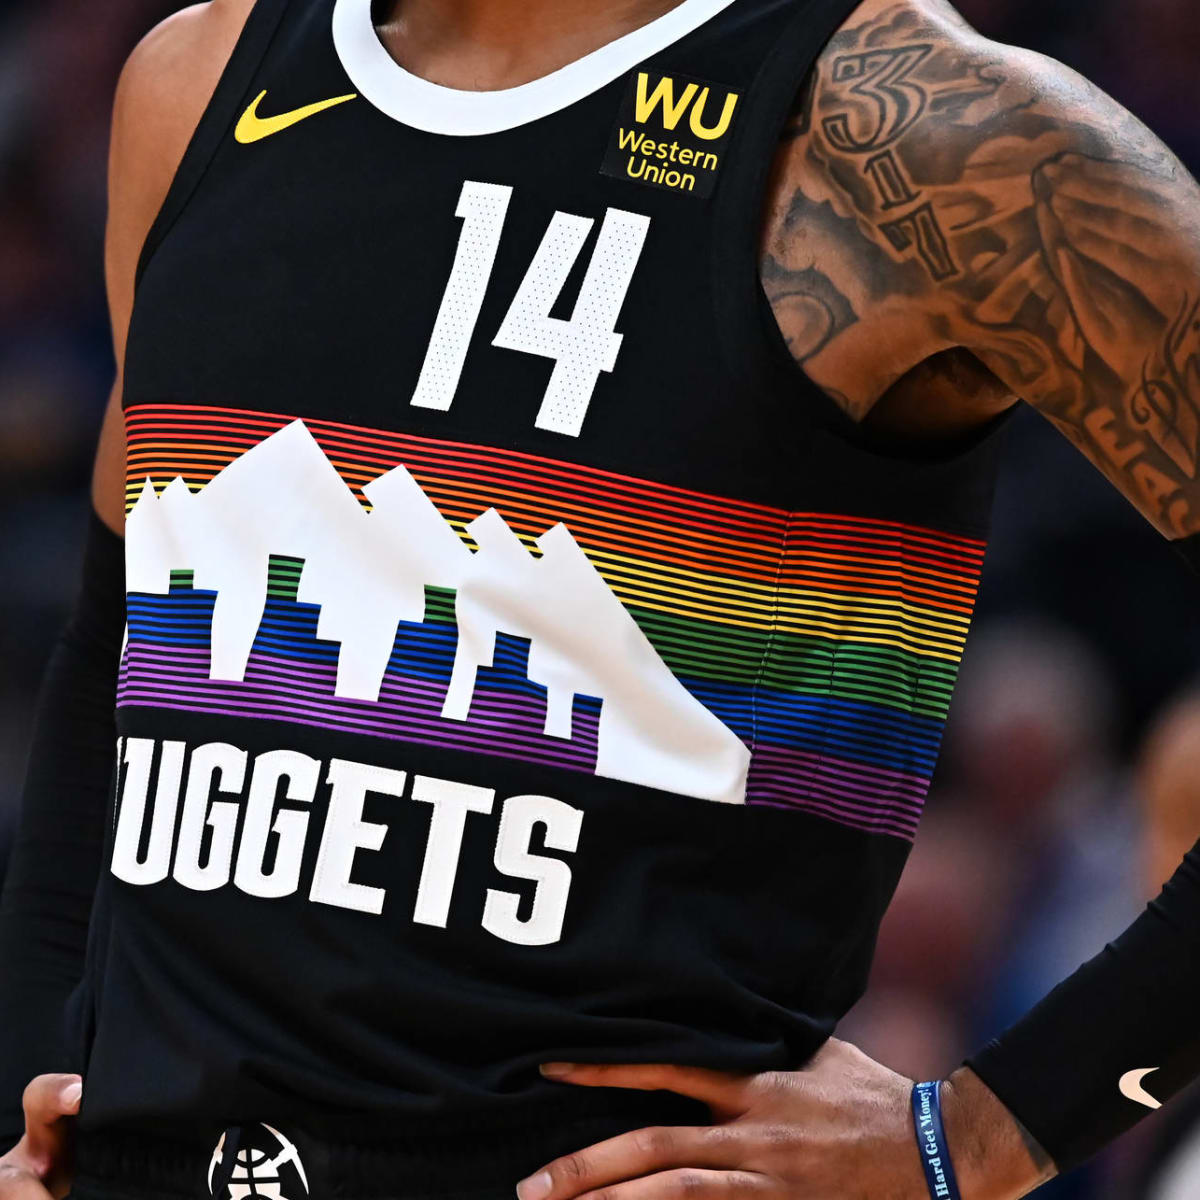 NBA Jersey Advertising - A Nightmare for Brands and Fans